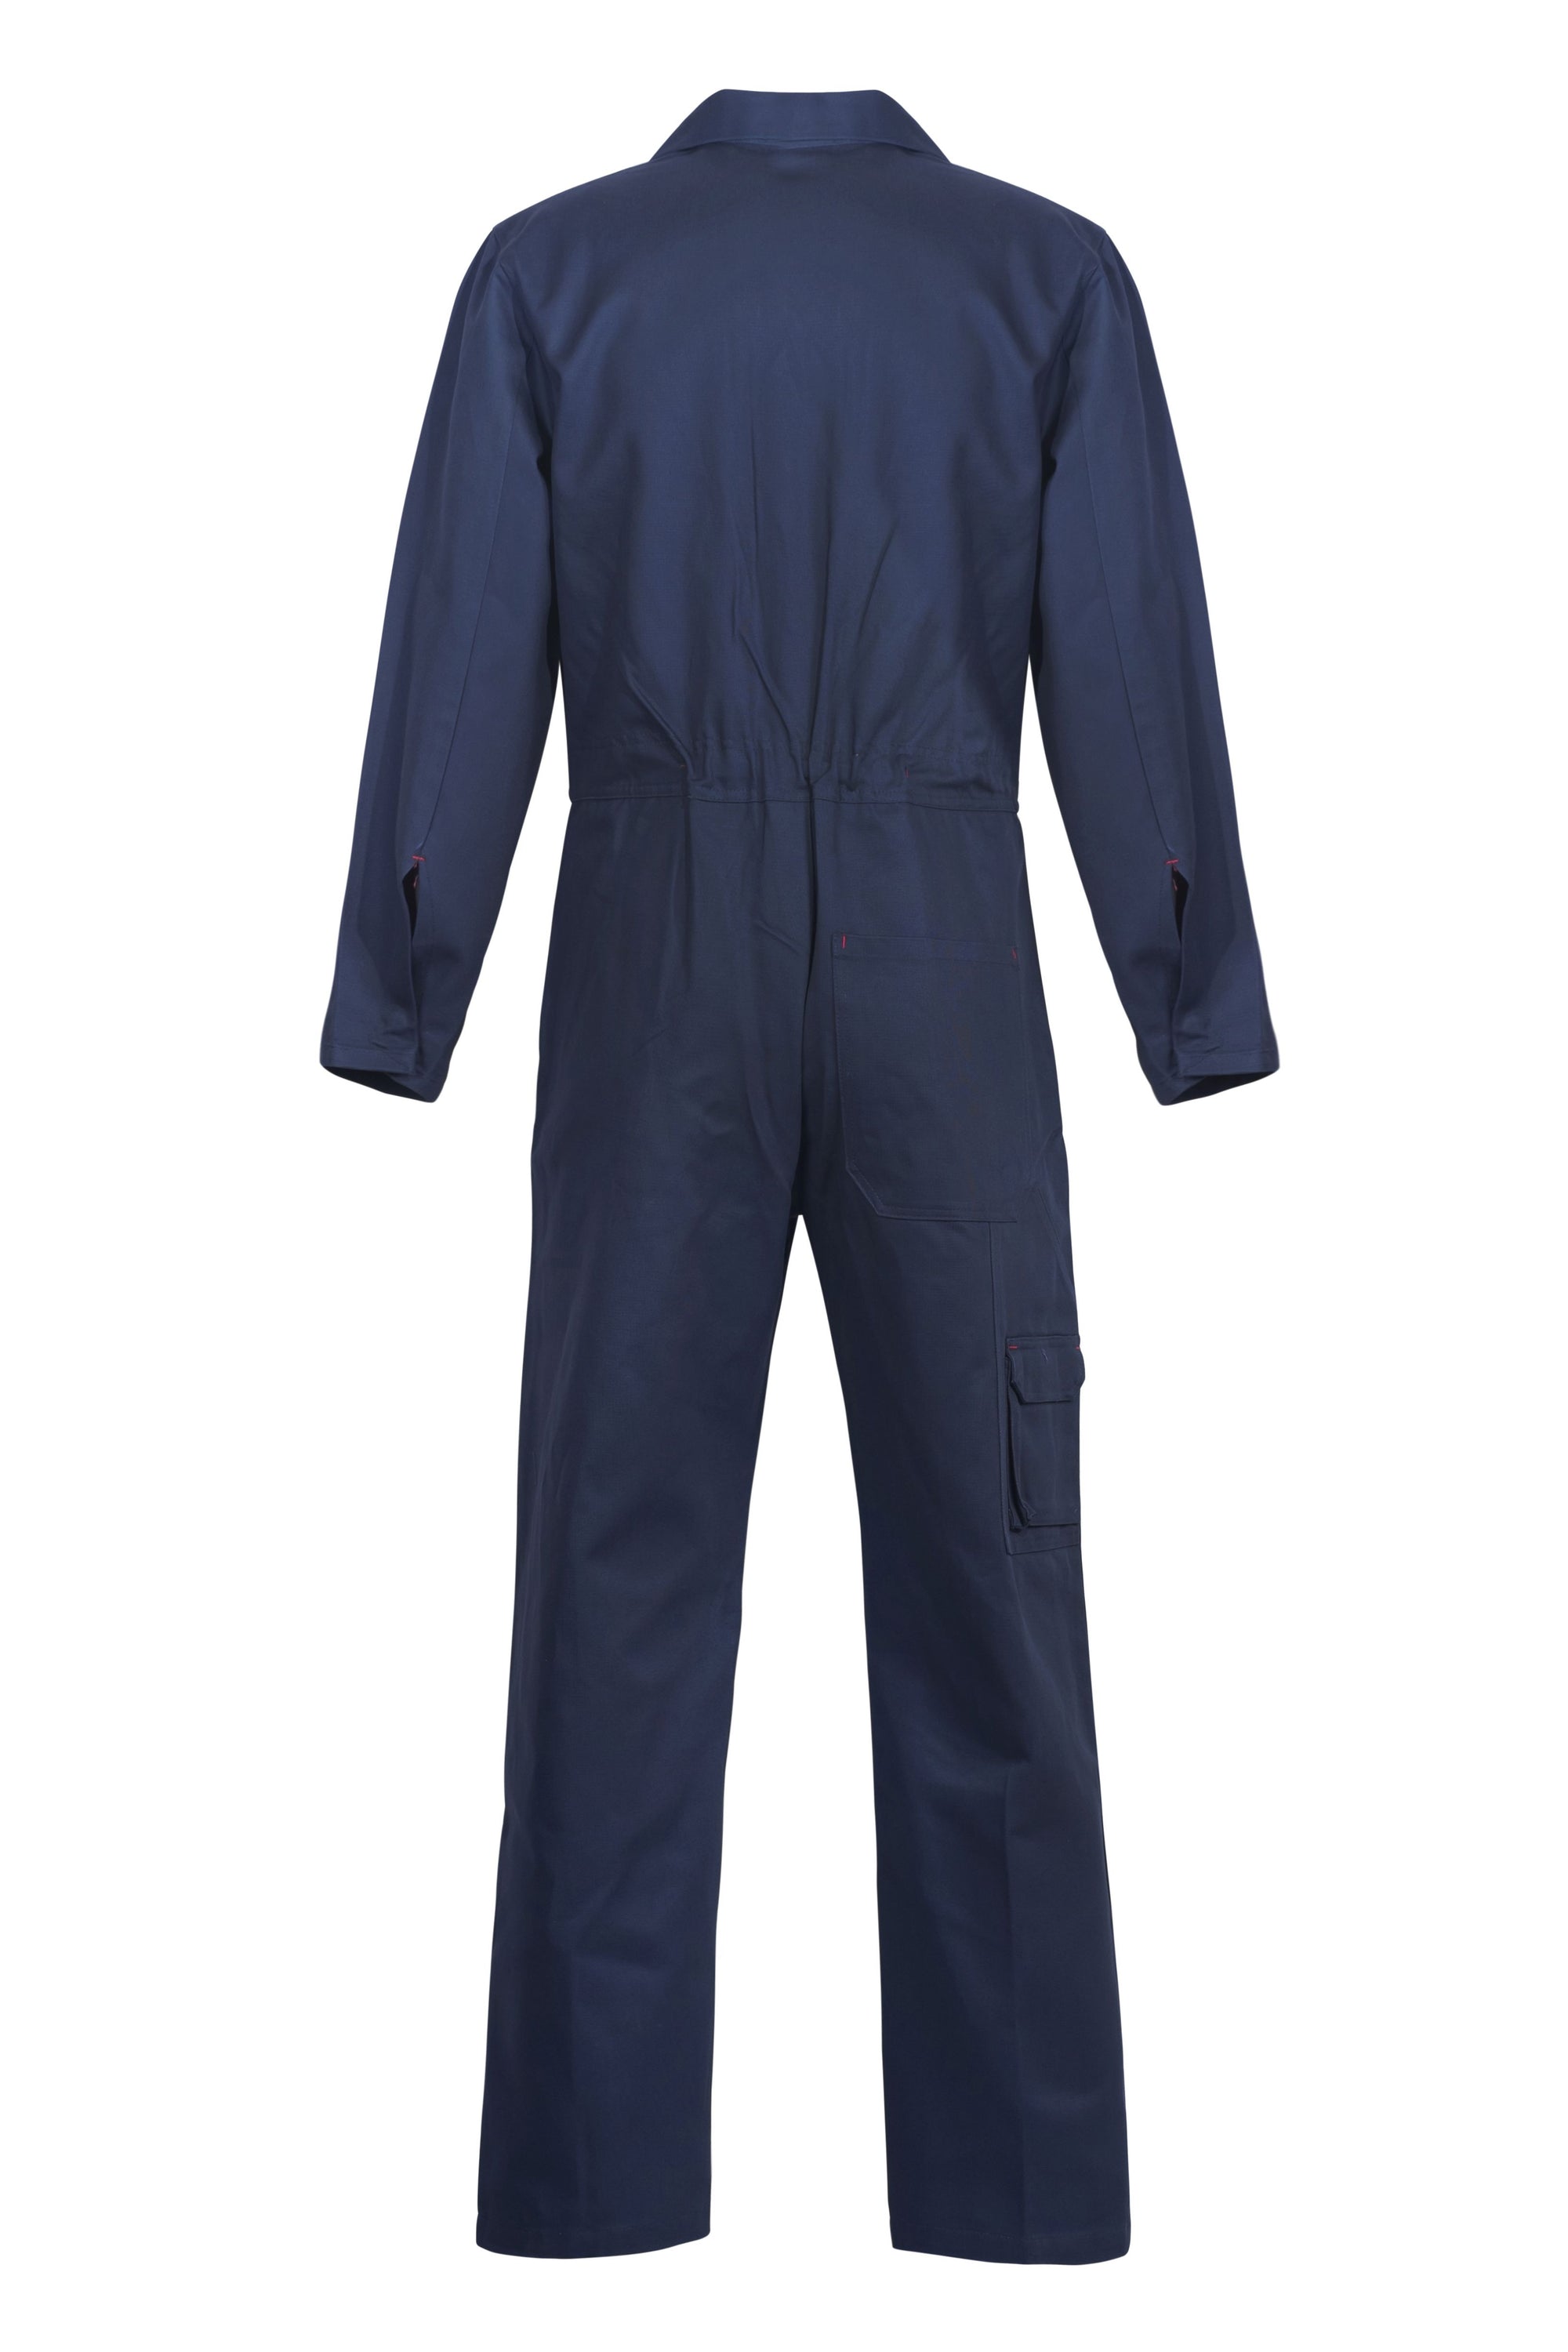 WorkCraft Mens Drill Coveralls 310g Navy 102R